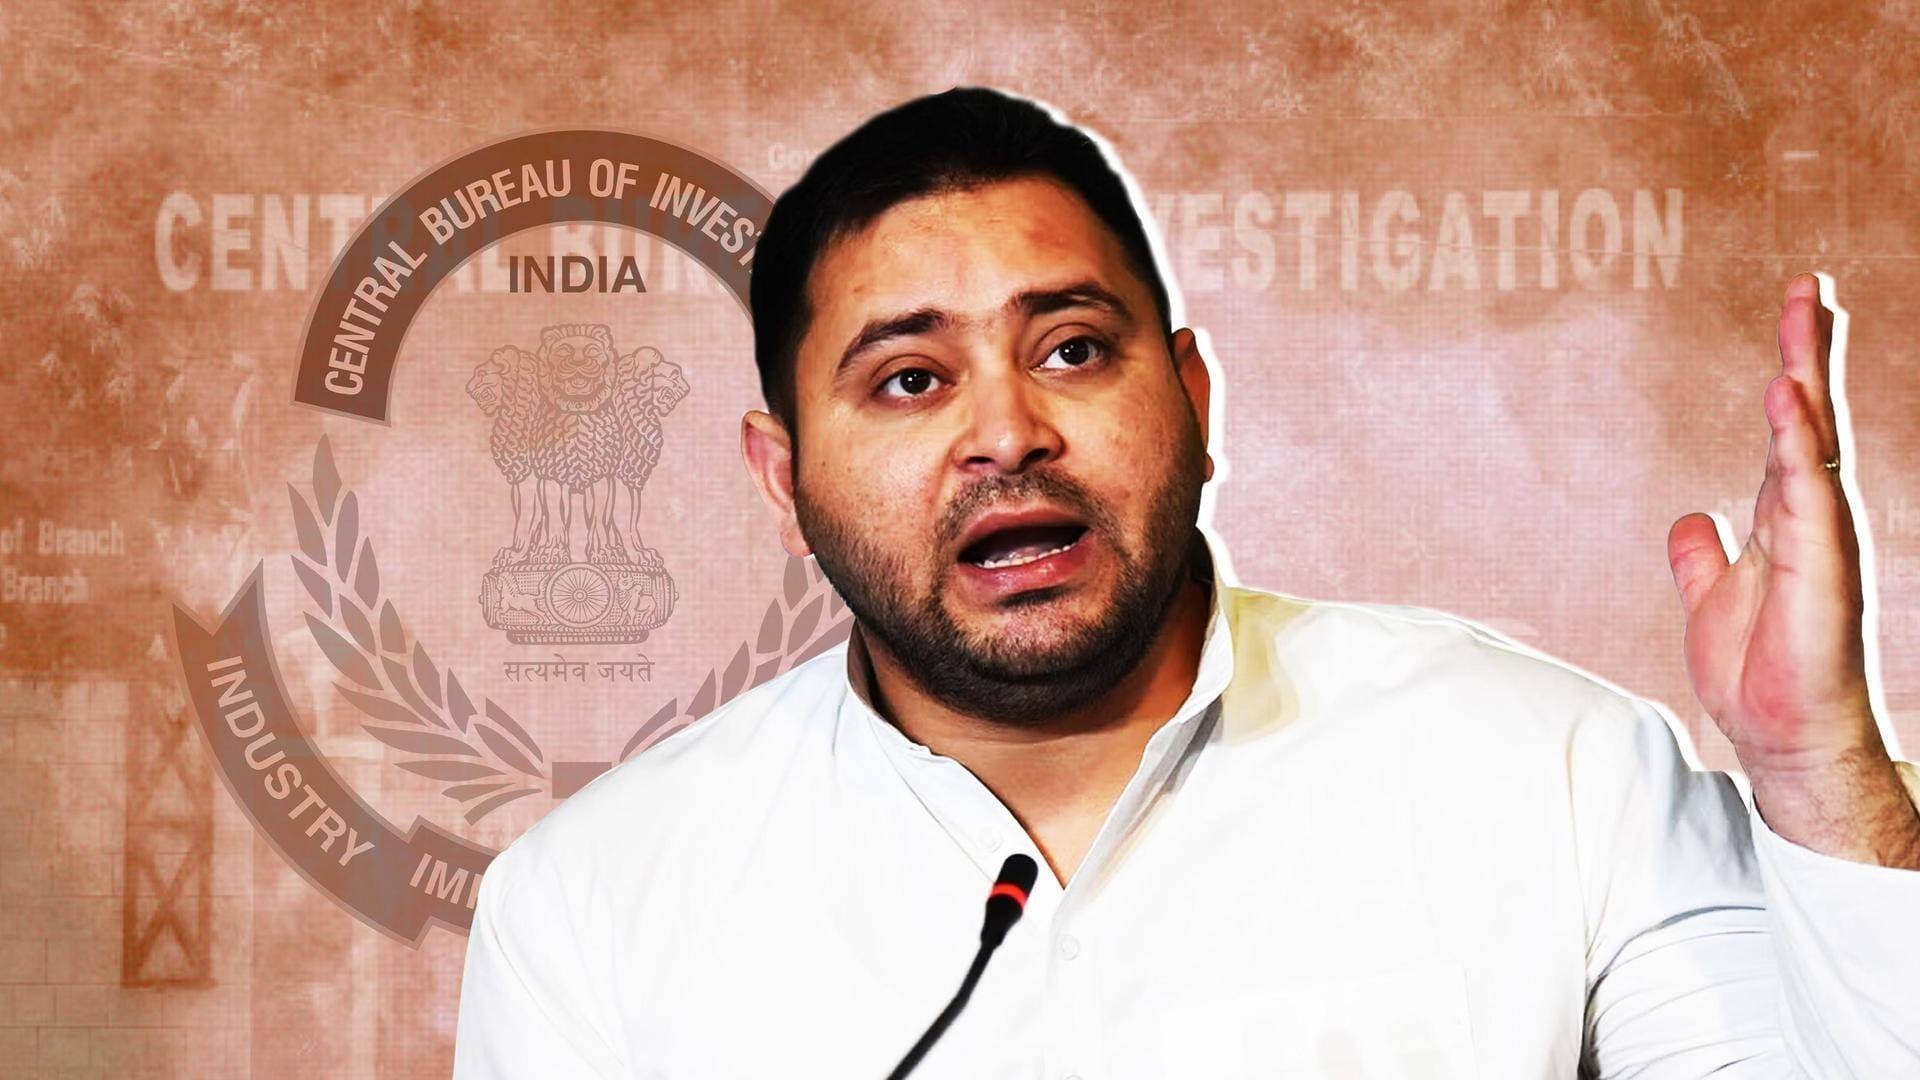 Land-for-jobs scam: Tejashwi Yadav appears before CBI for questioning